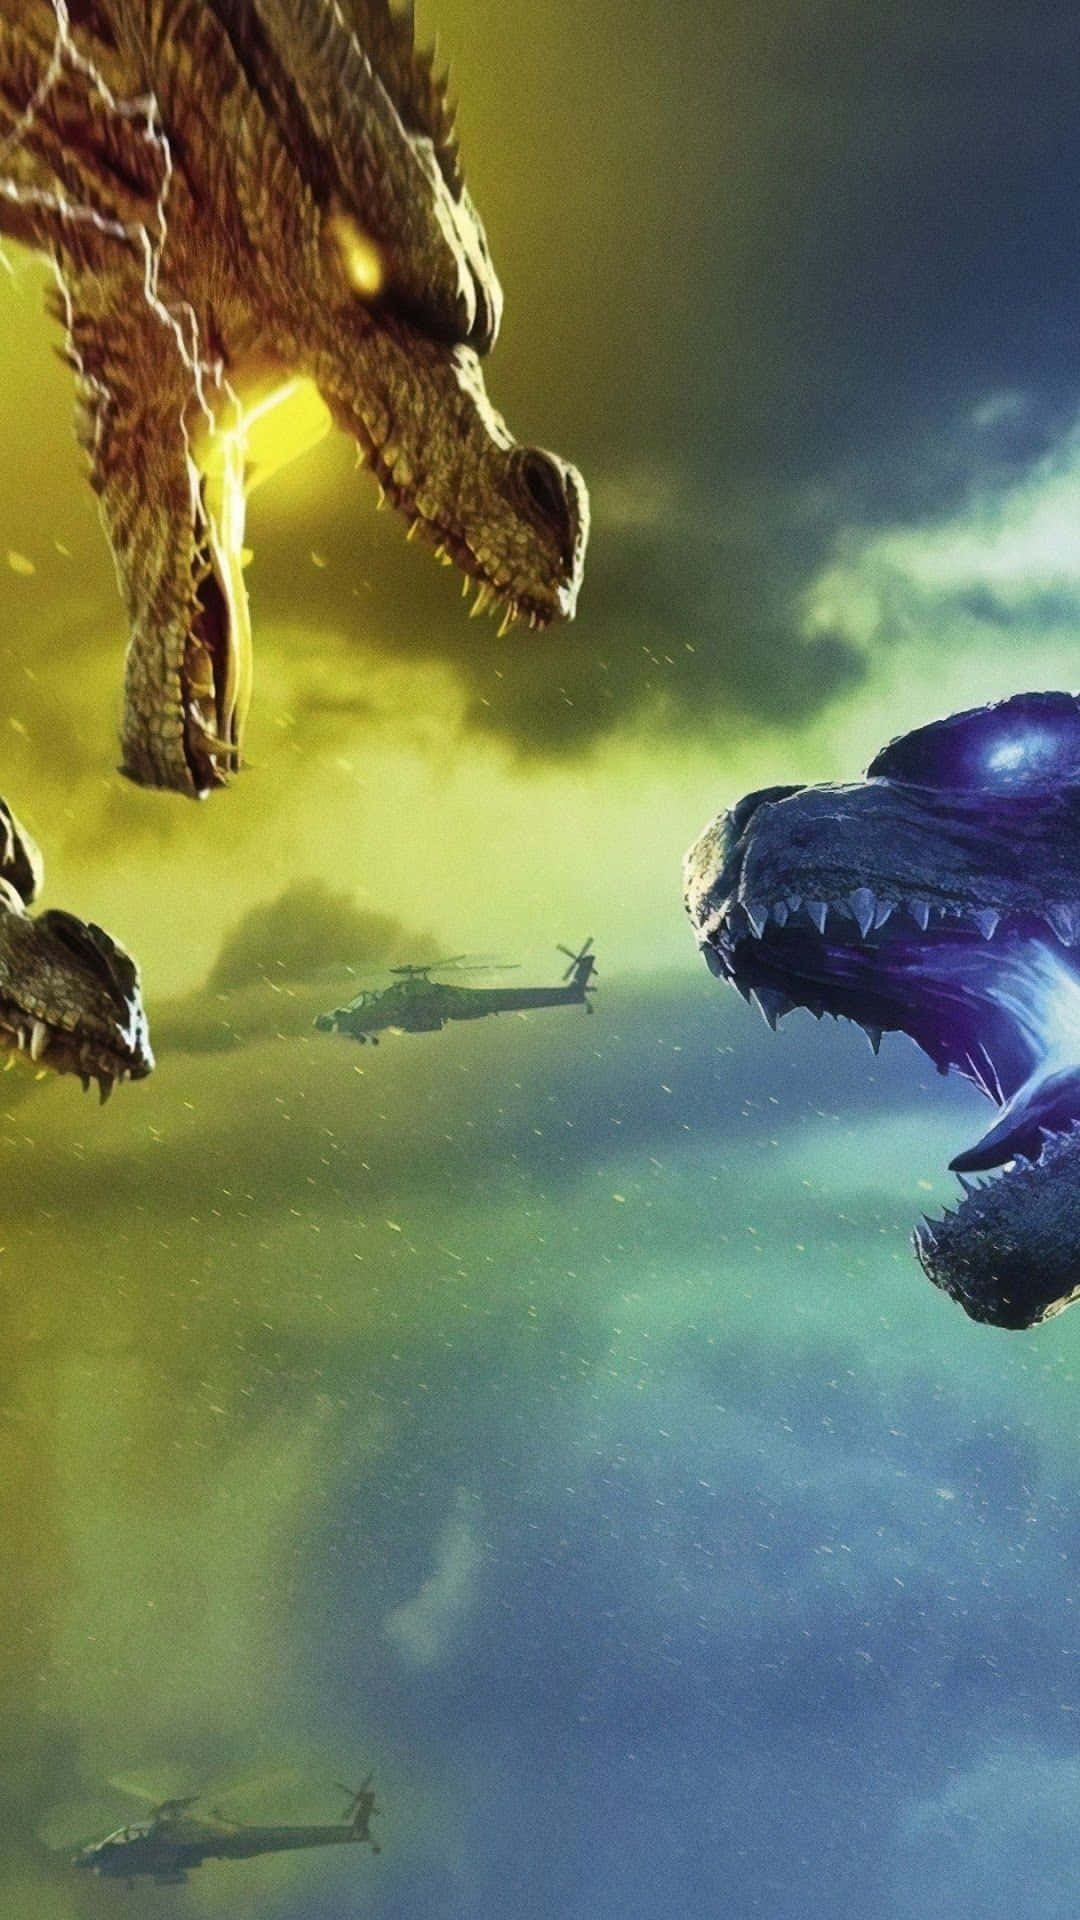 King Ghidorah - The Fearsome Three-Headed Monster Unleashed Wallpaper